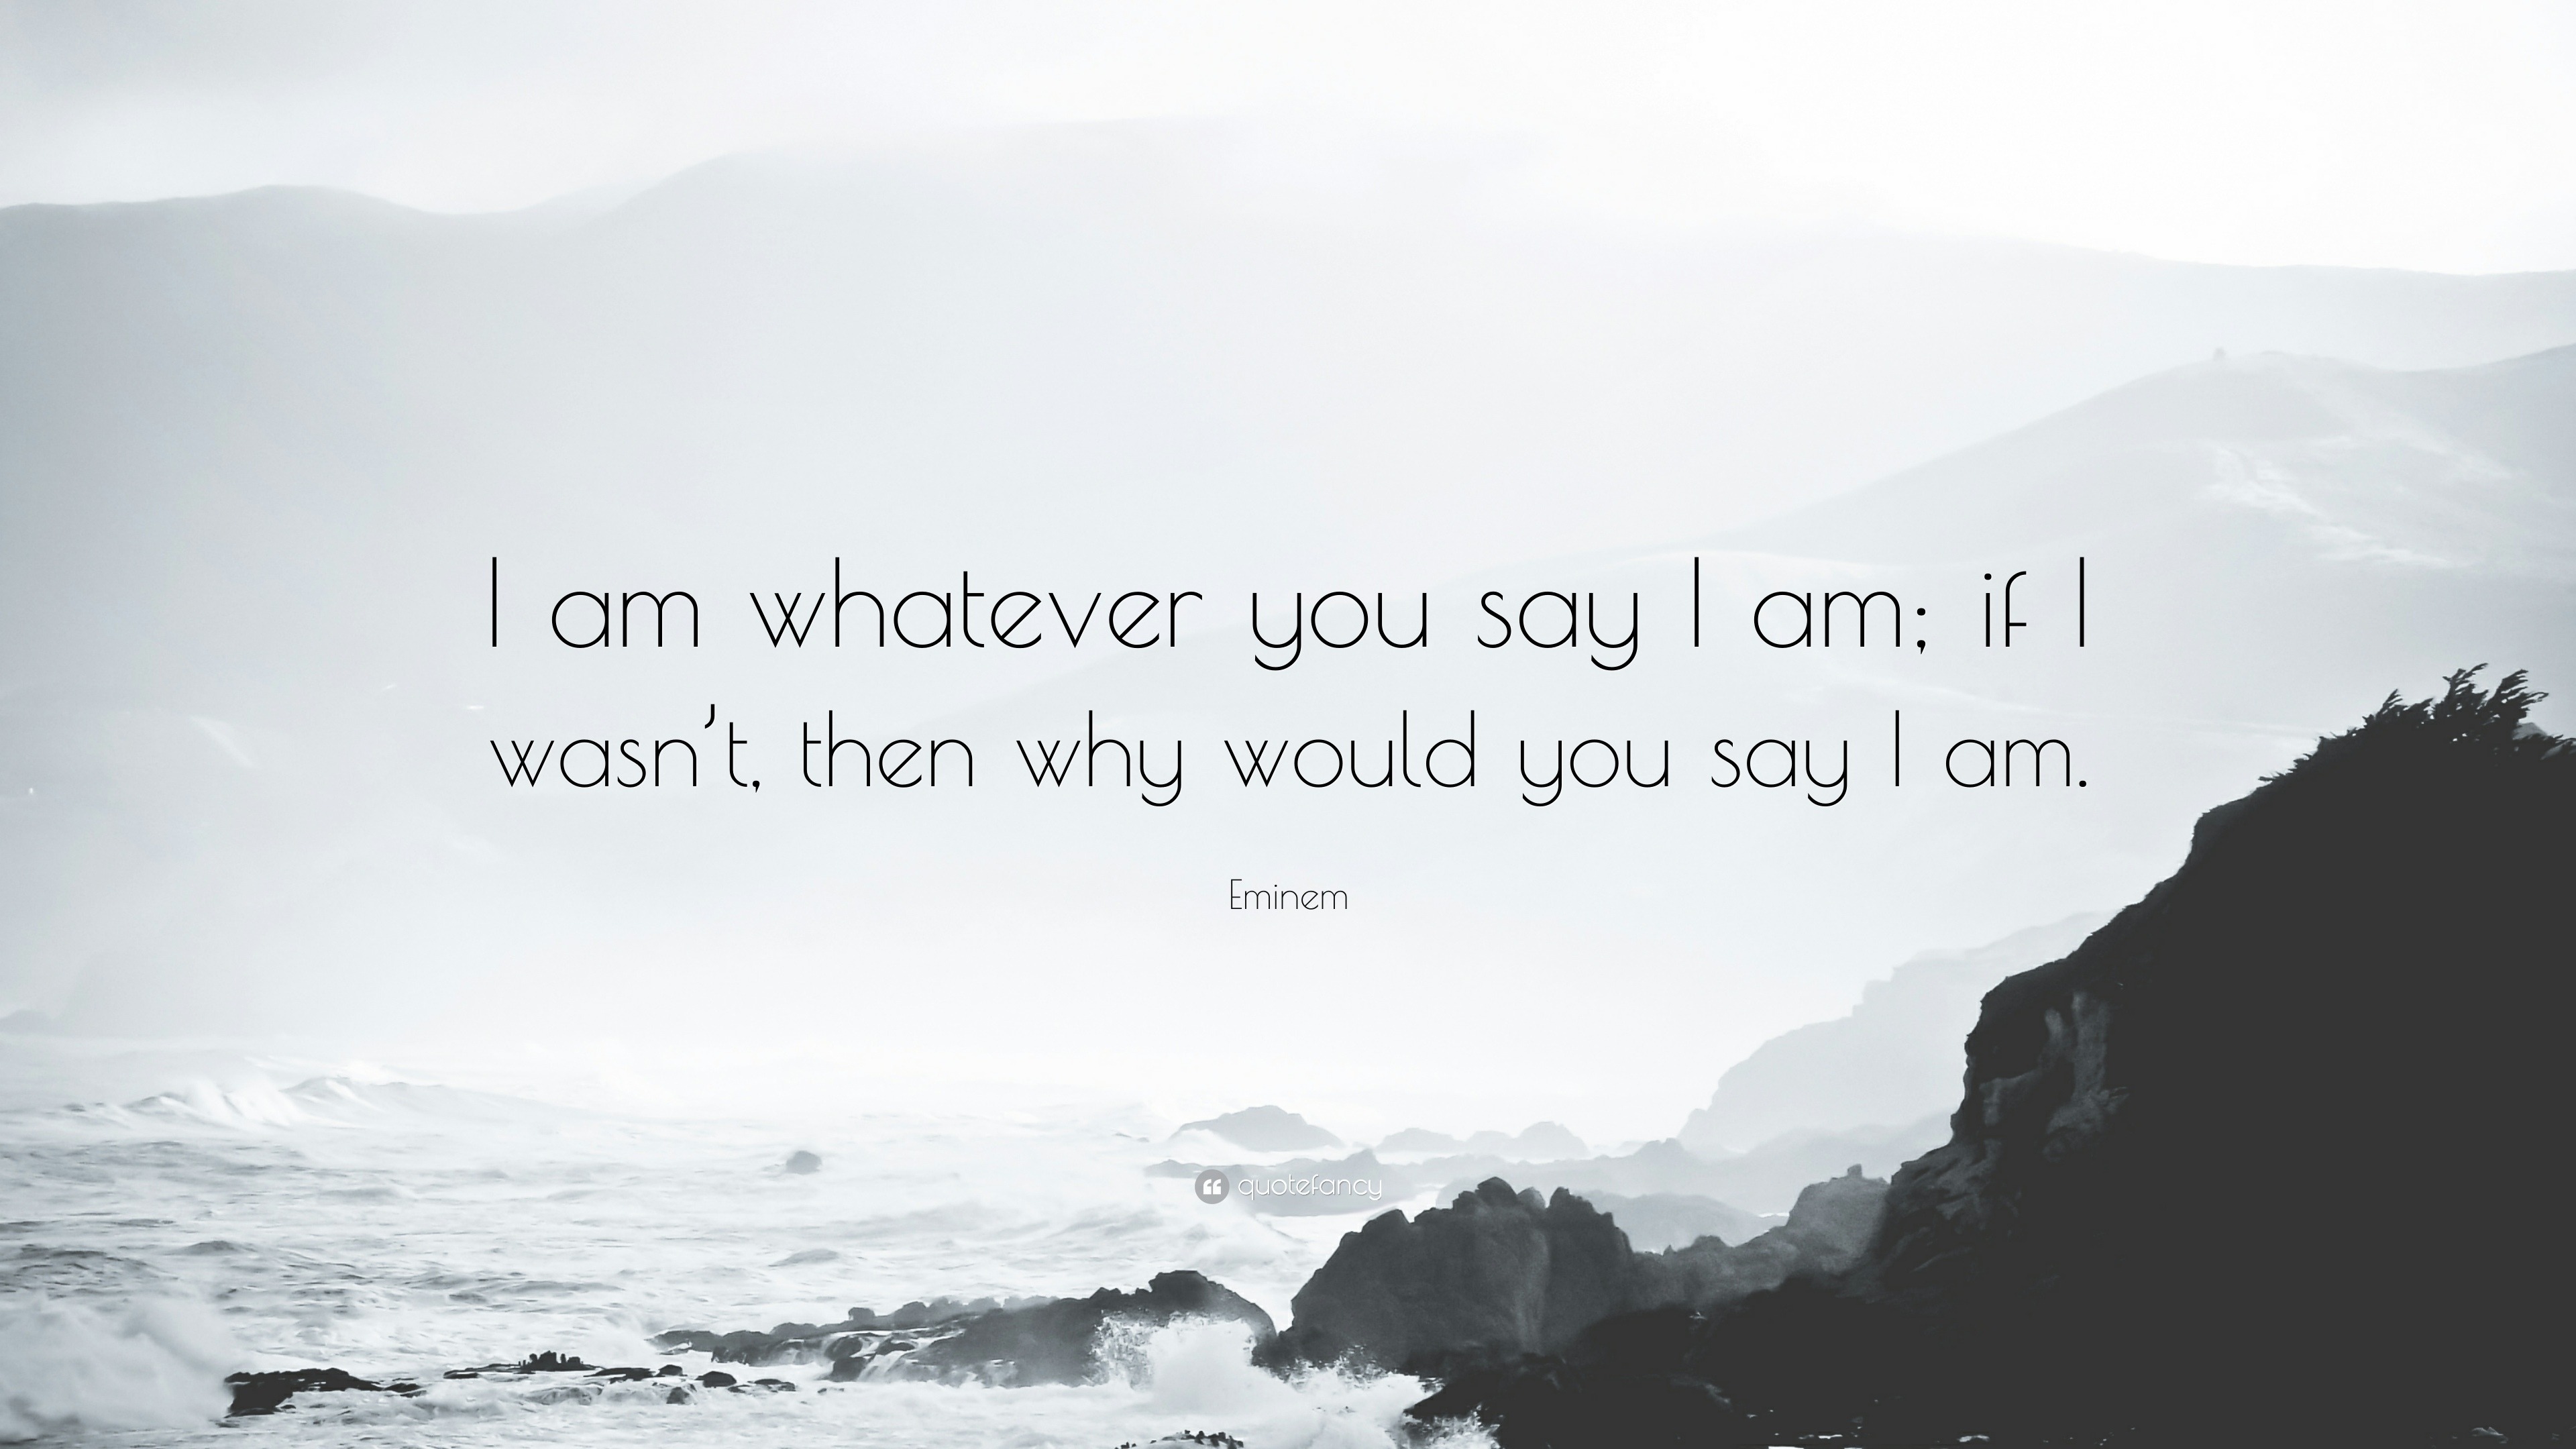 Whatever You Say I Won t Eminem Quote: “I am whatever you say I am; if I wasn't, then why would